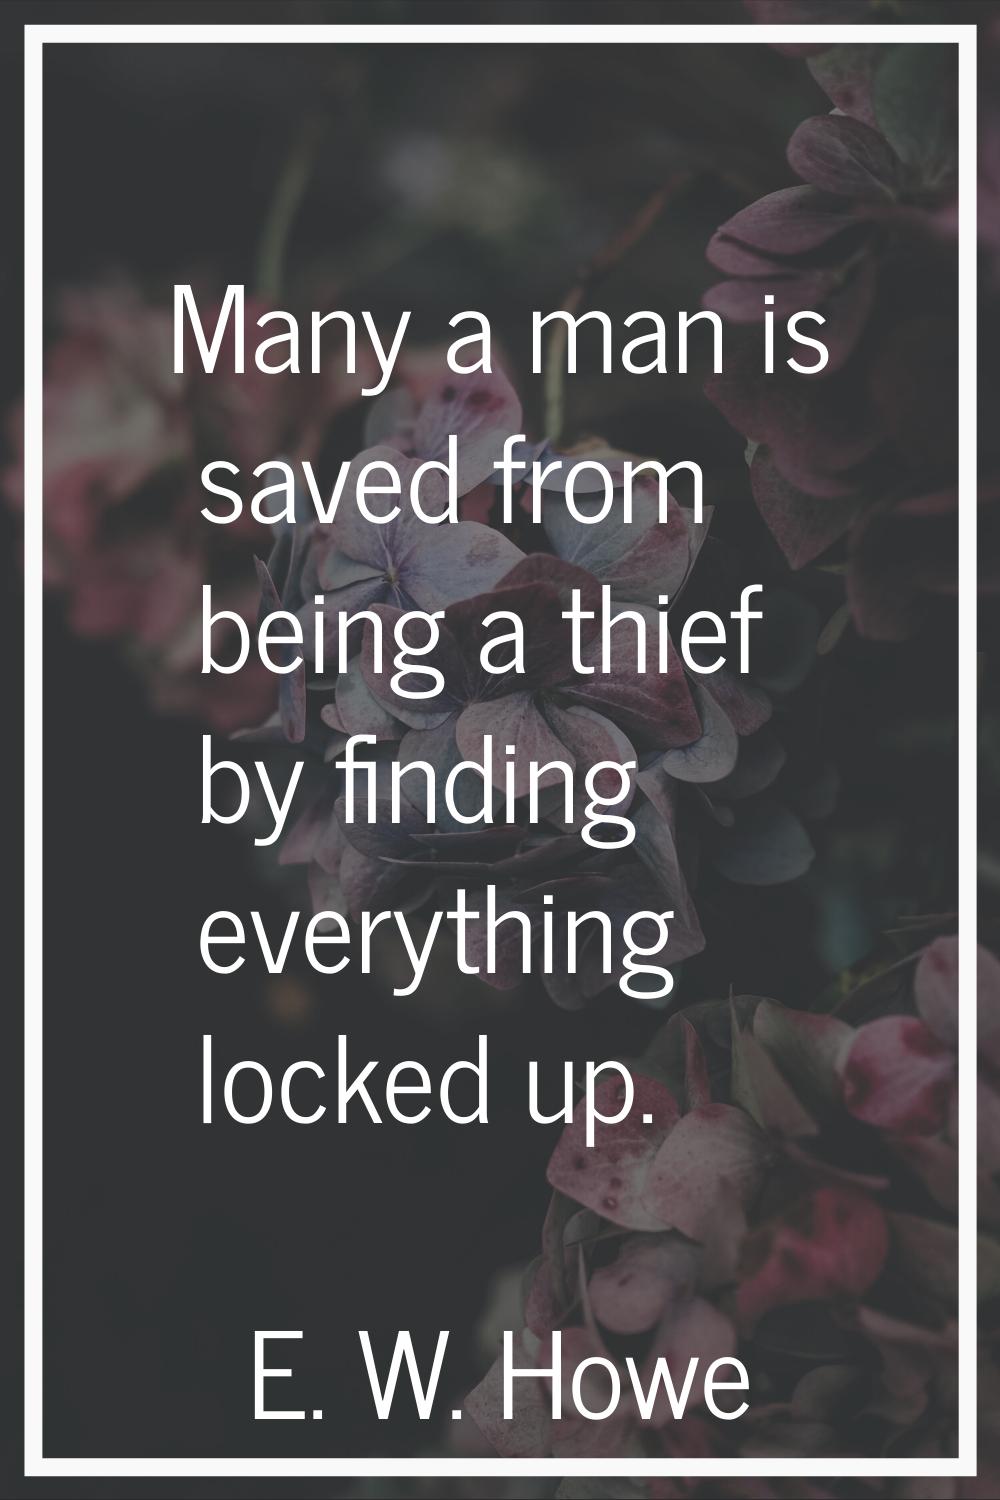 Many a man is saved from being a thief by finding everything locked up.